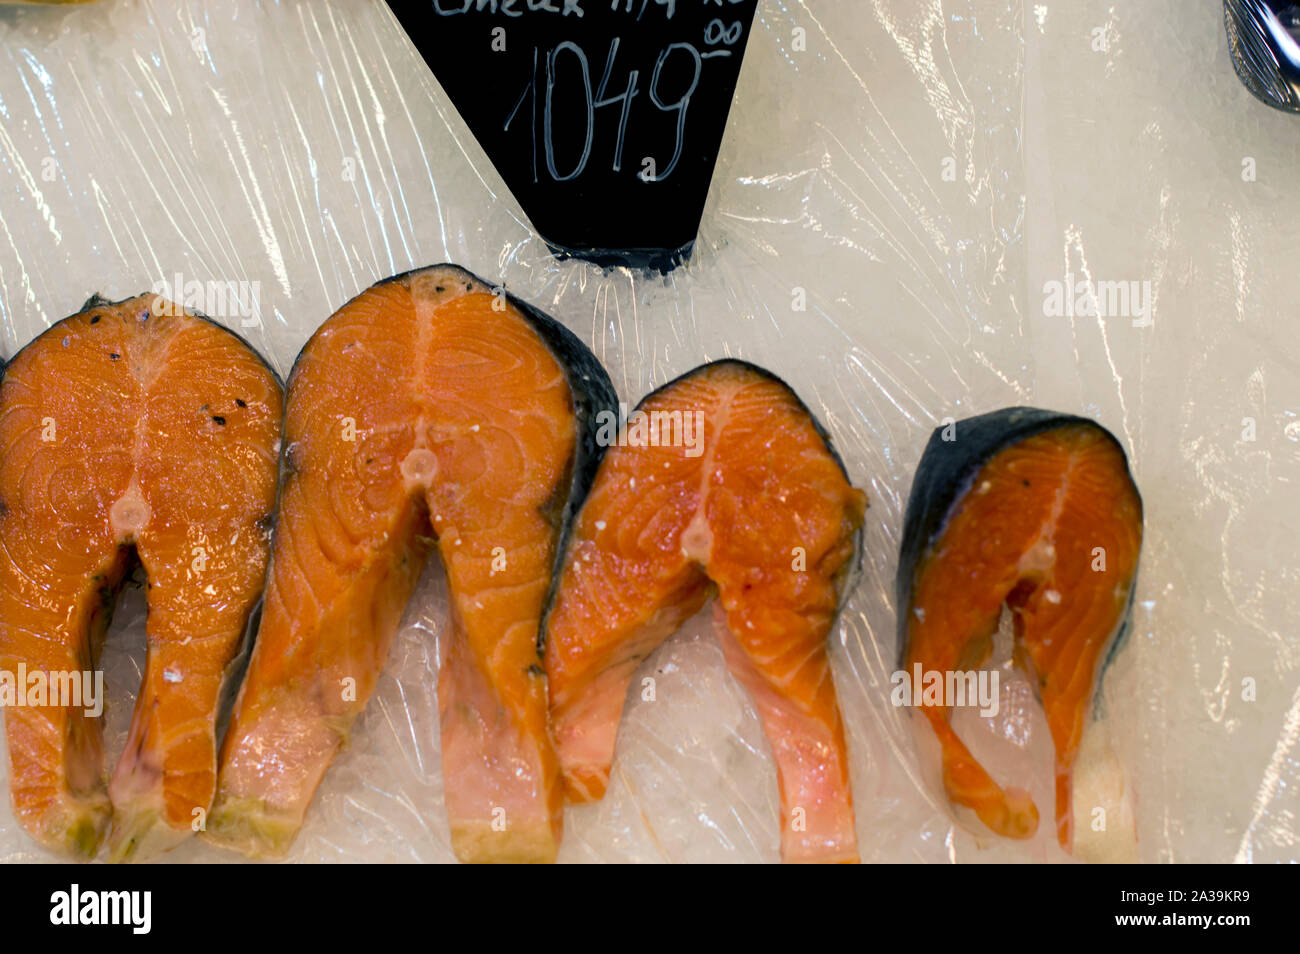 Appetizing slices and pieces of cod fish lie on the ice of the counter, ready for sale in a supermarket. Close-up. Stock Photo